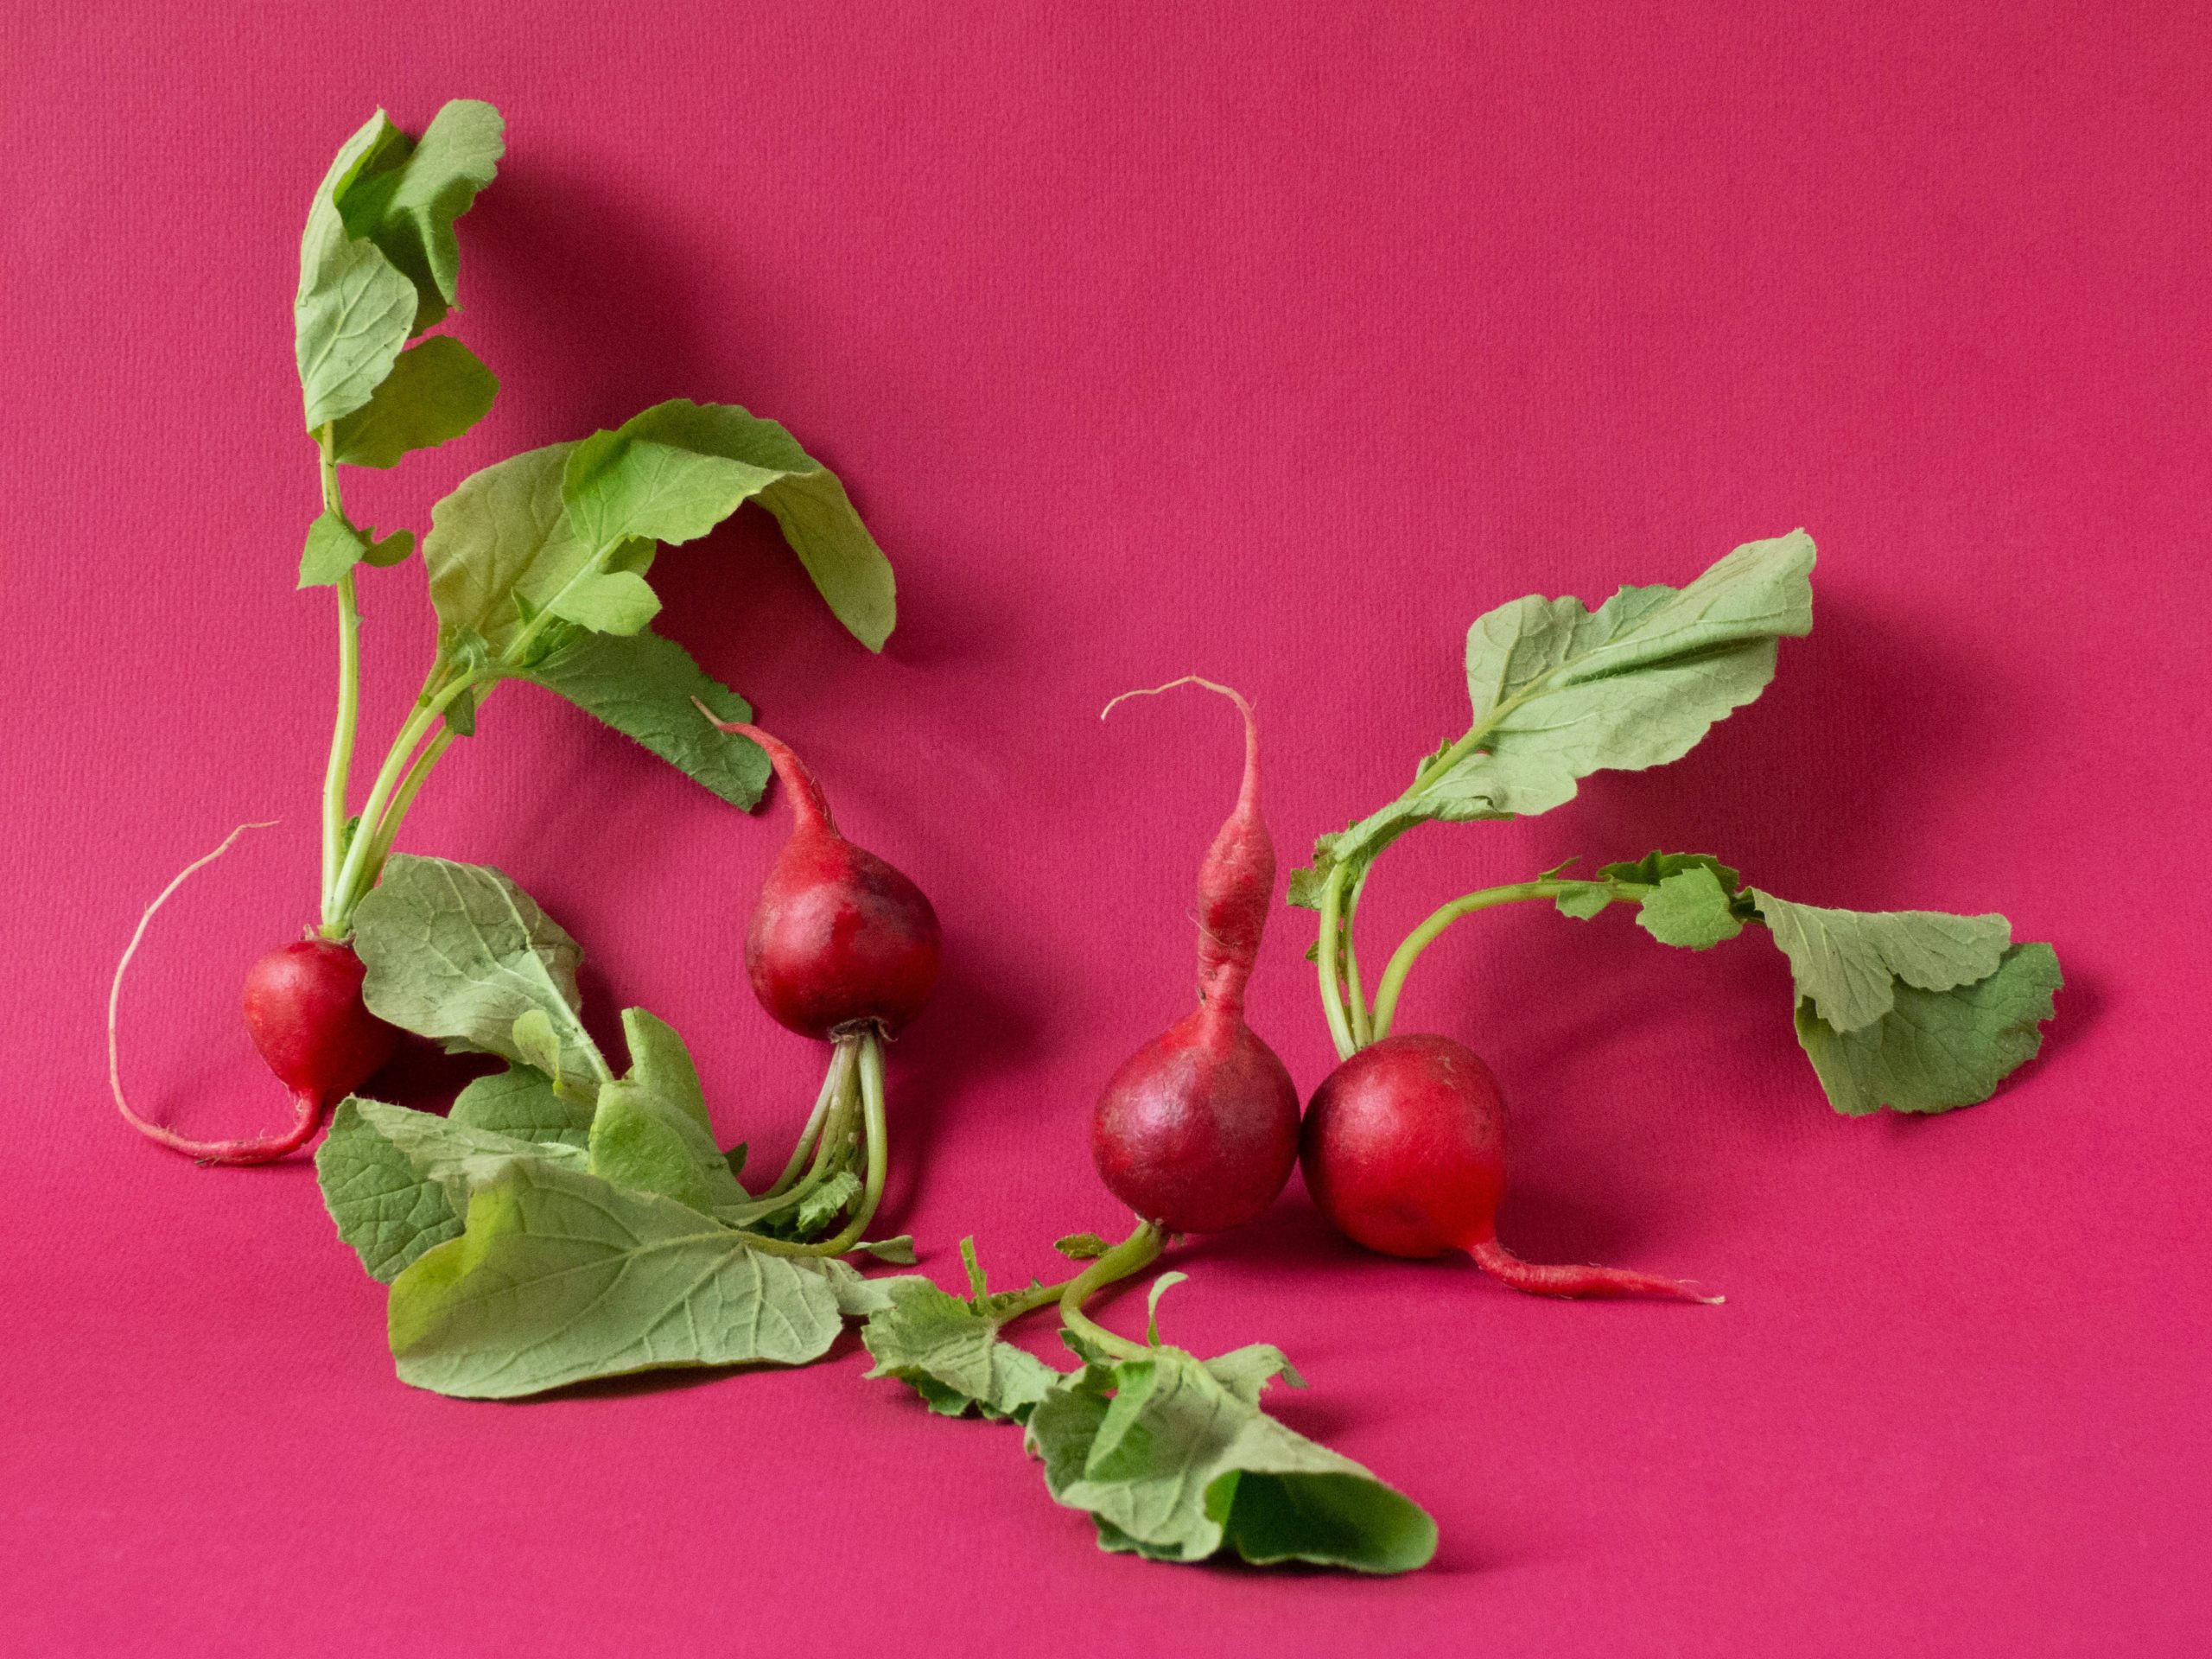 Four radishes sitting on a red background